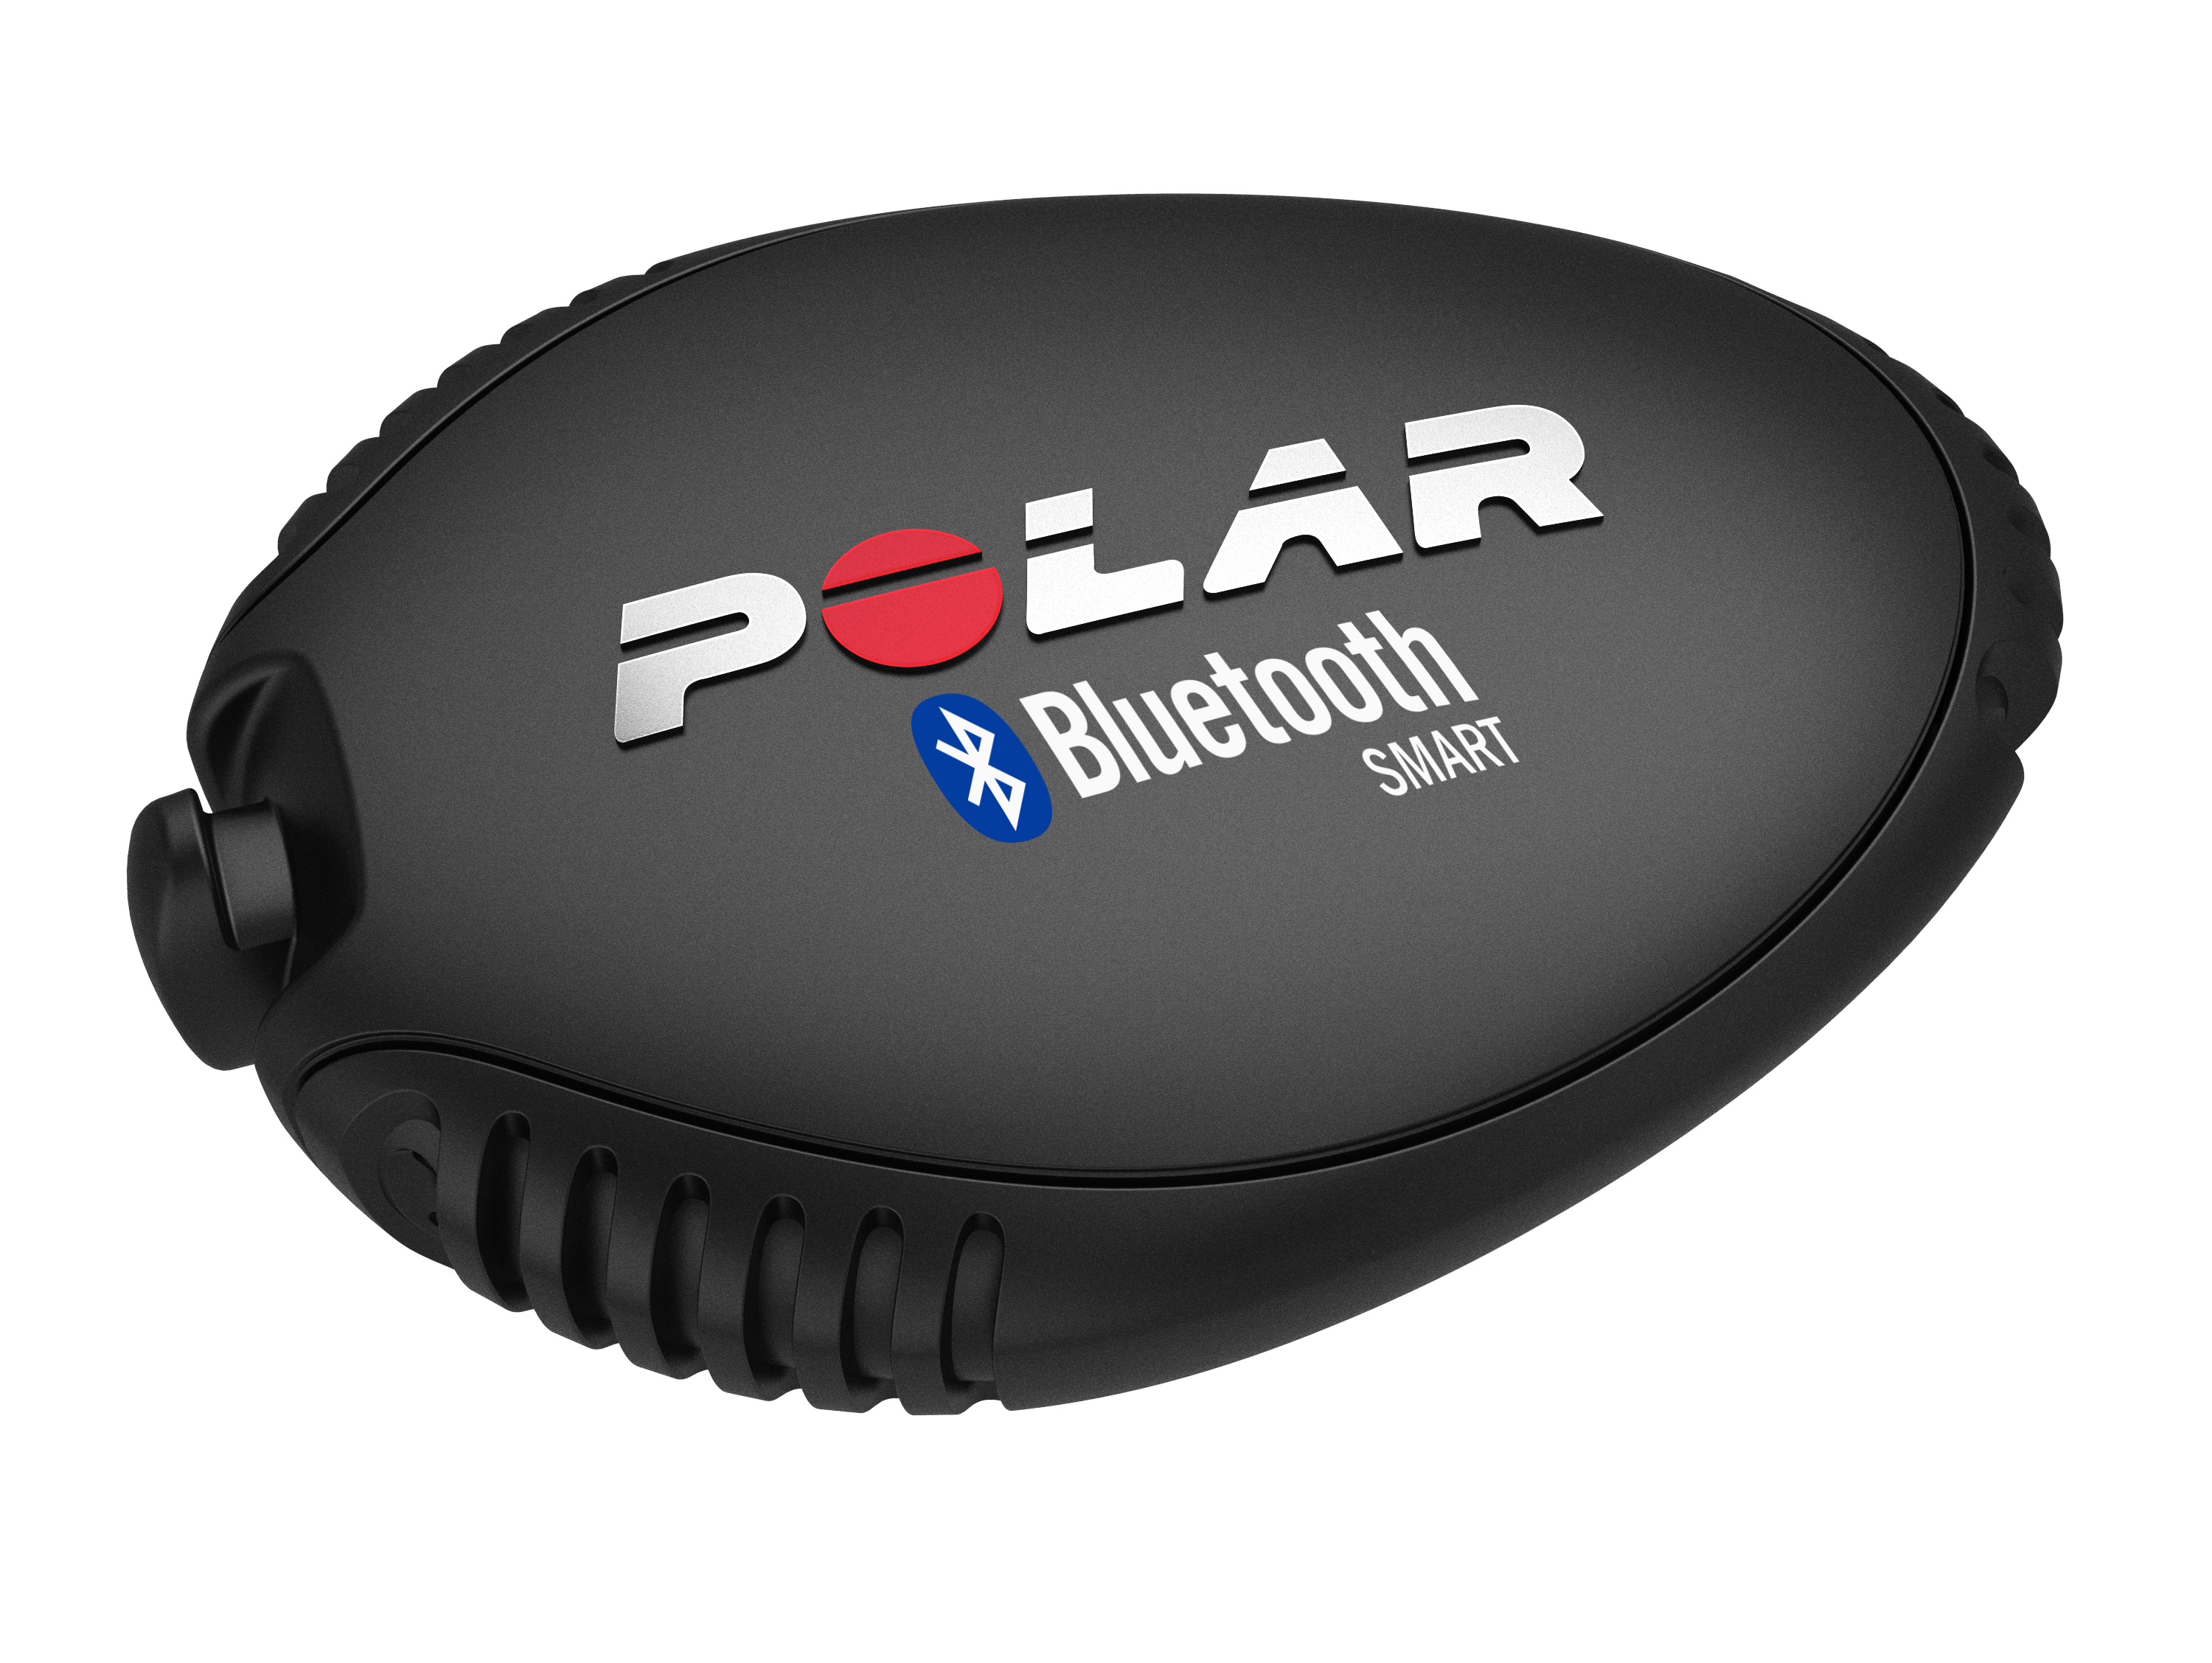 Polar Bluetooth Stride Sensor For iPhone 5S, 5 and 4S At 35% Off